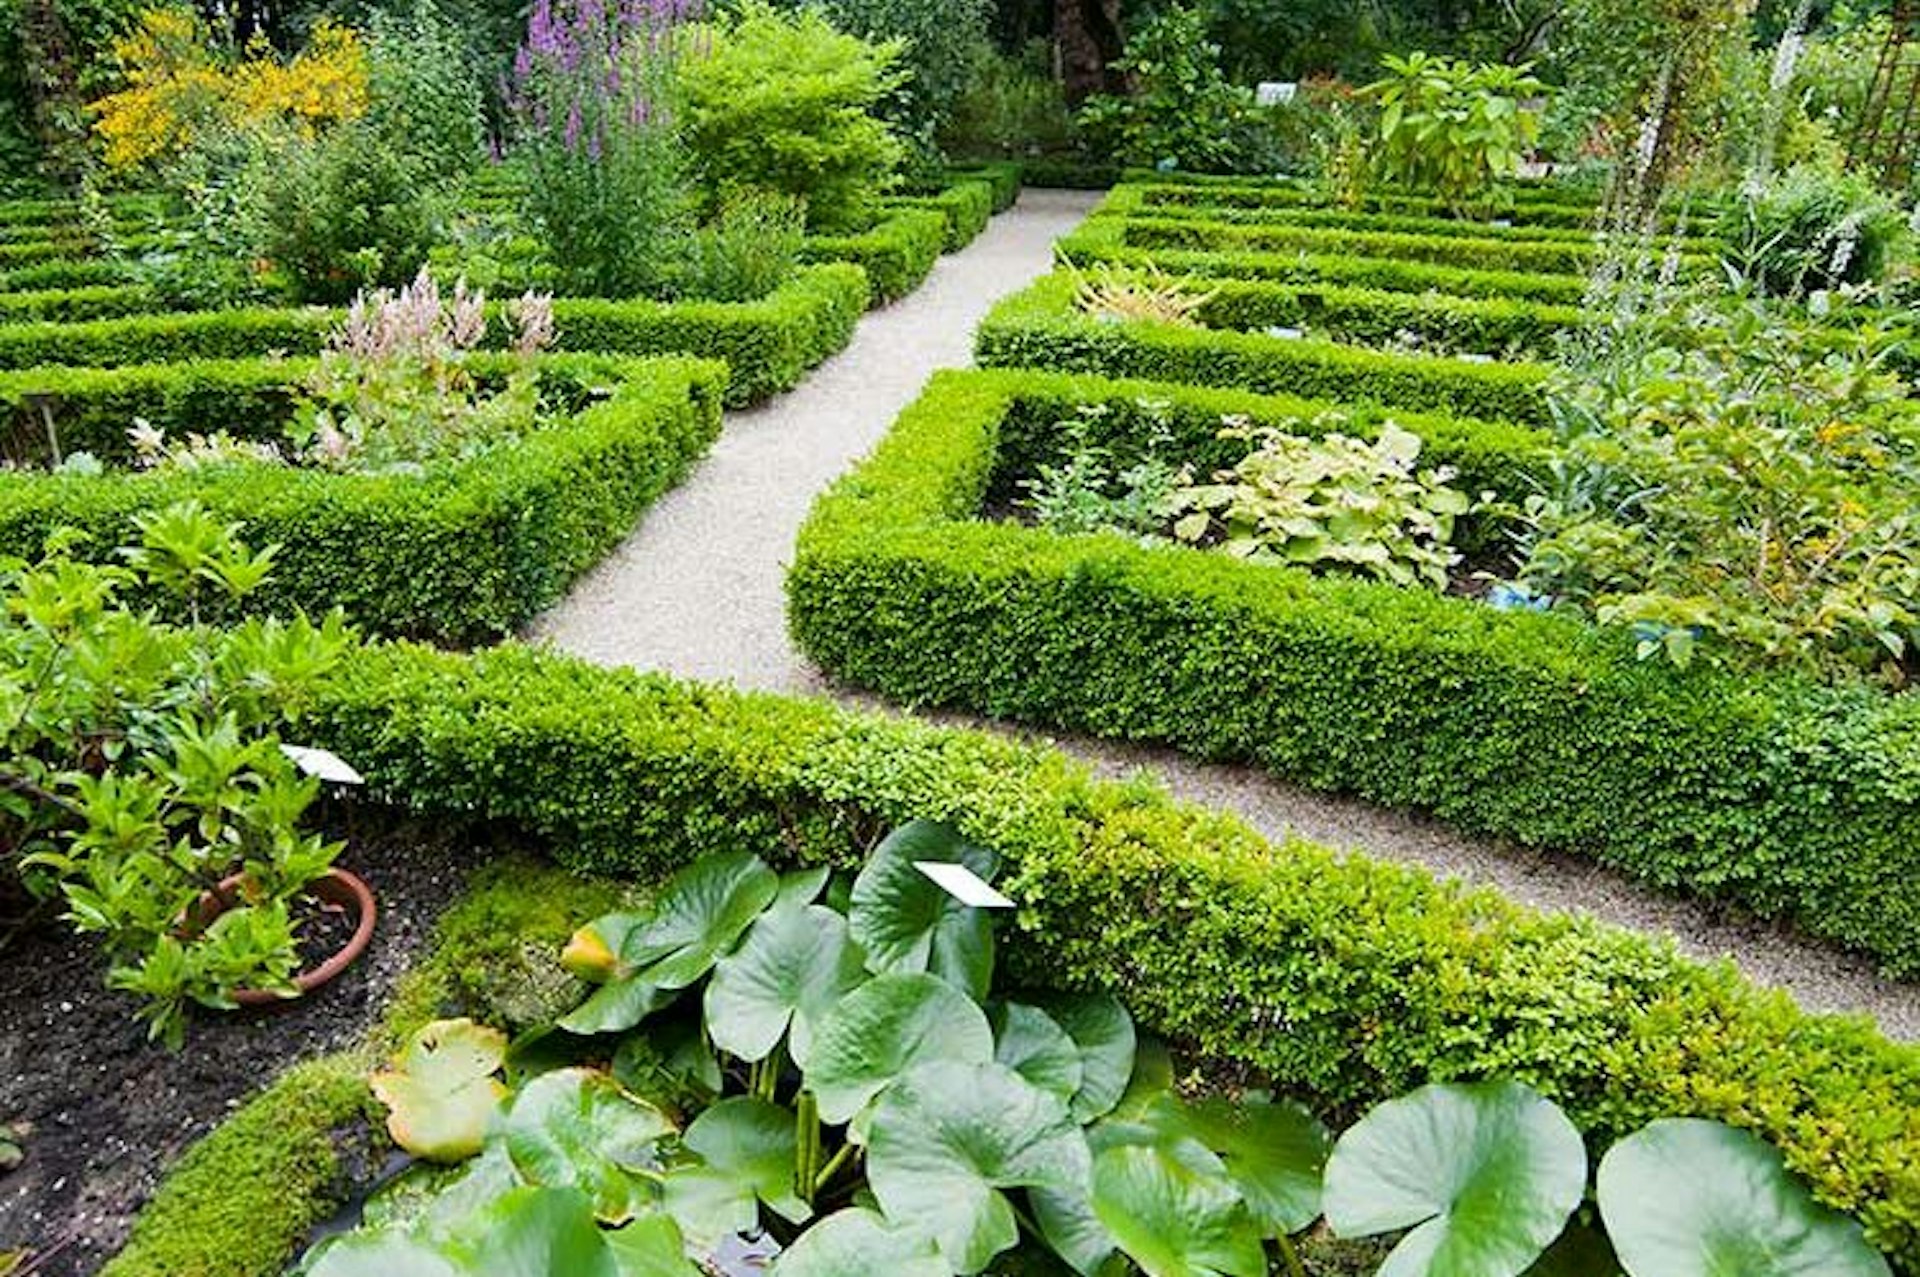 Immaculately tended shrubbery in Amsterdam's serene and green Hortus Botanicus. Image by Karen Massier / E+ / Getty Images.